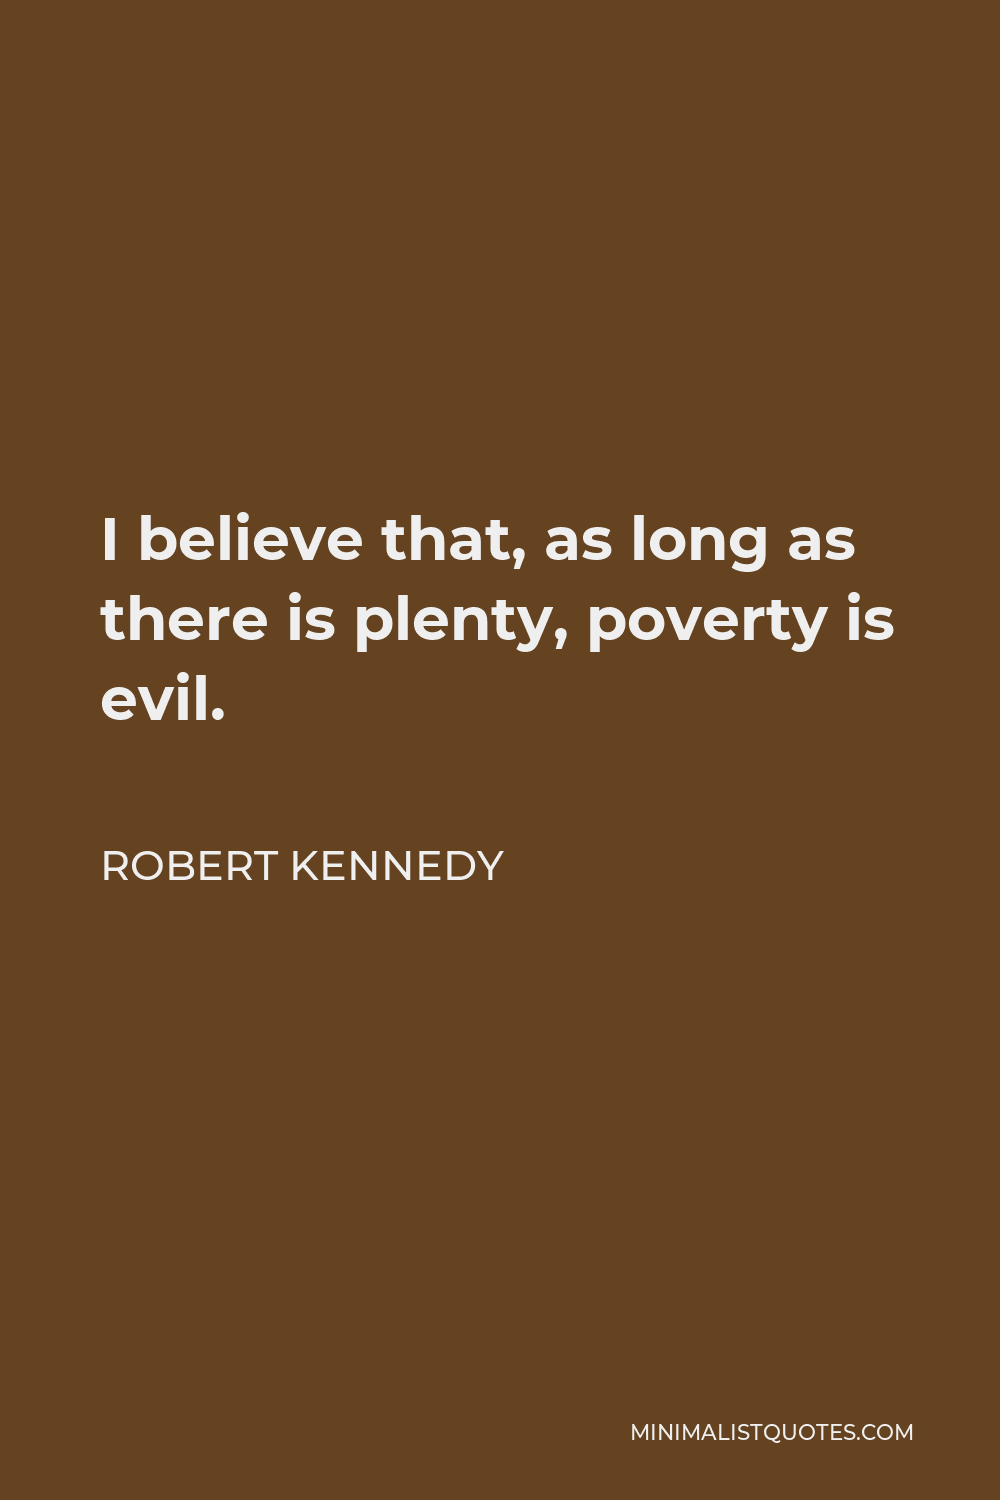 Robert Kennedy Quote - I believe that, as long as there is plenty, poverty is evil. Government belongs wherever evil needs an adversary and there are people in distress.